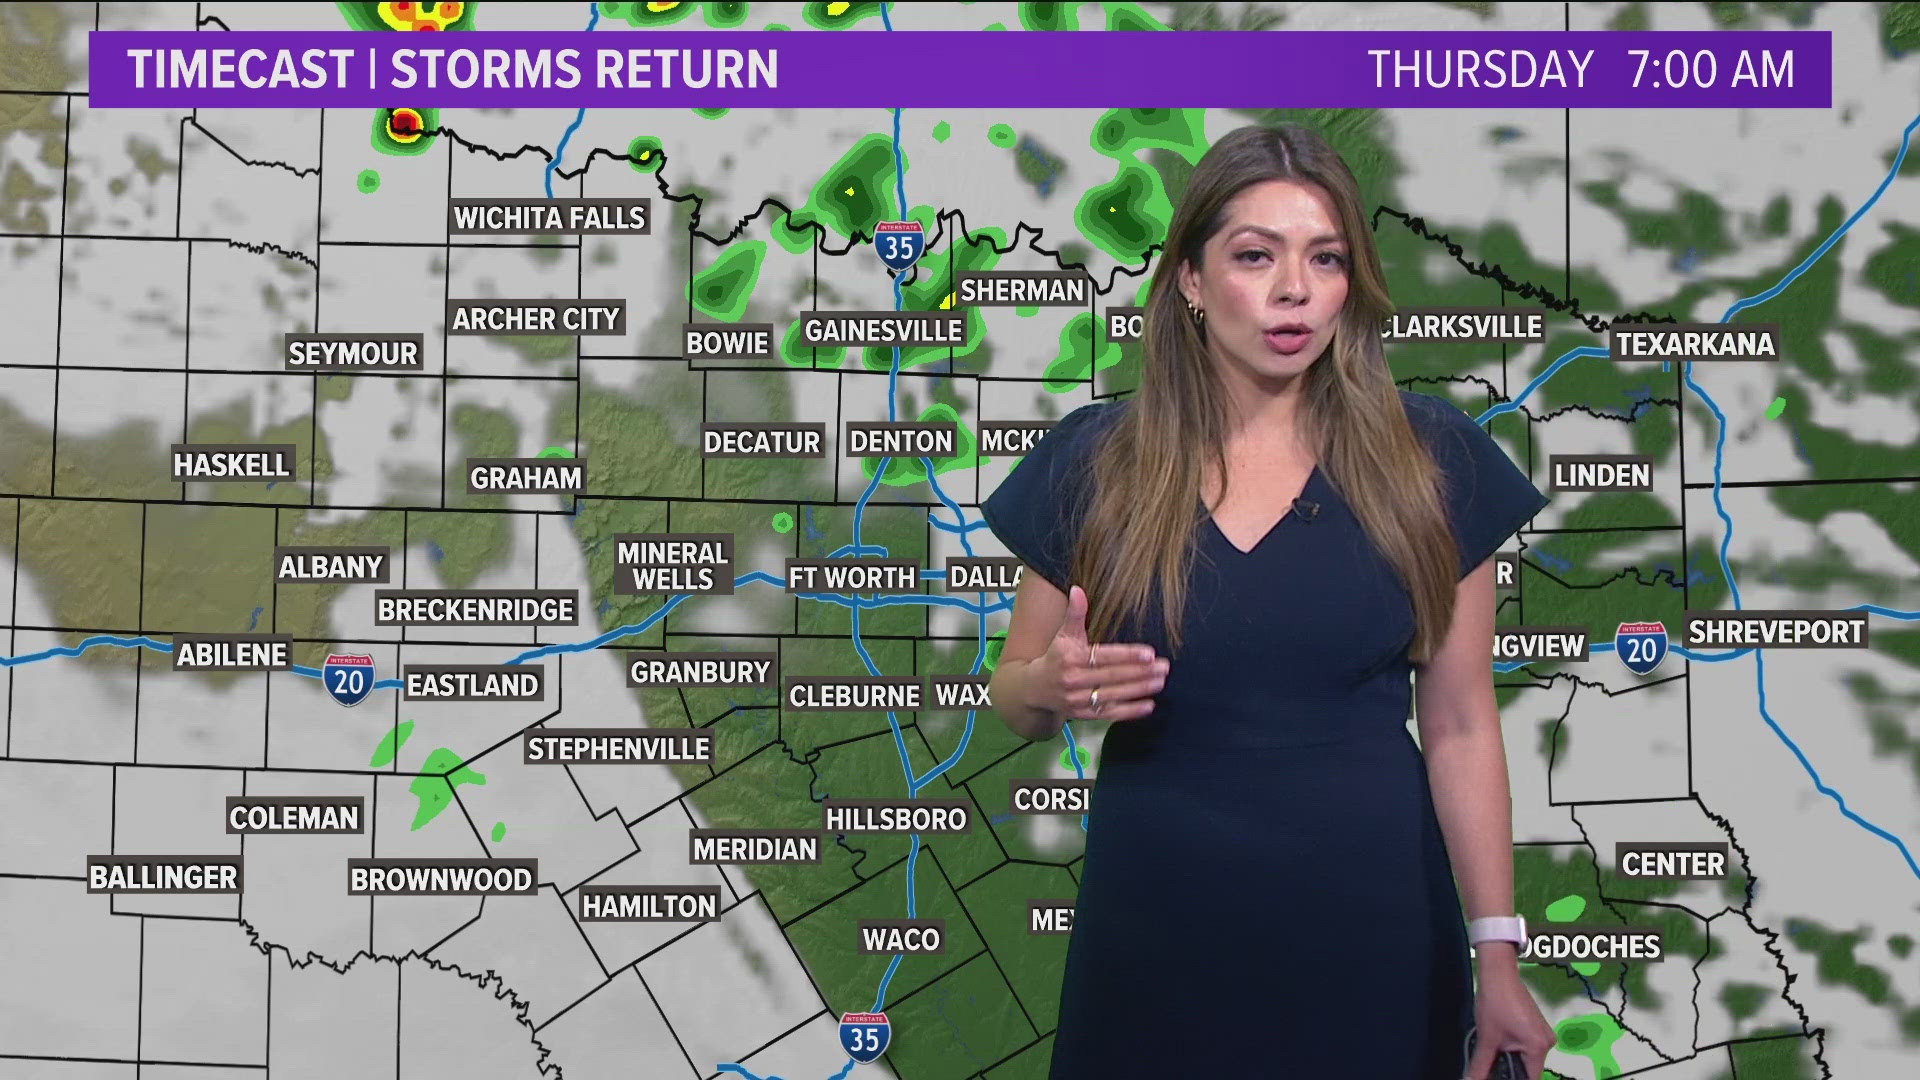 Storms return to North Texas after a brief reprieve.